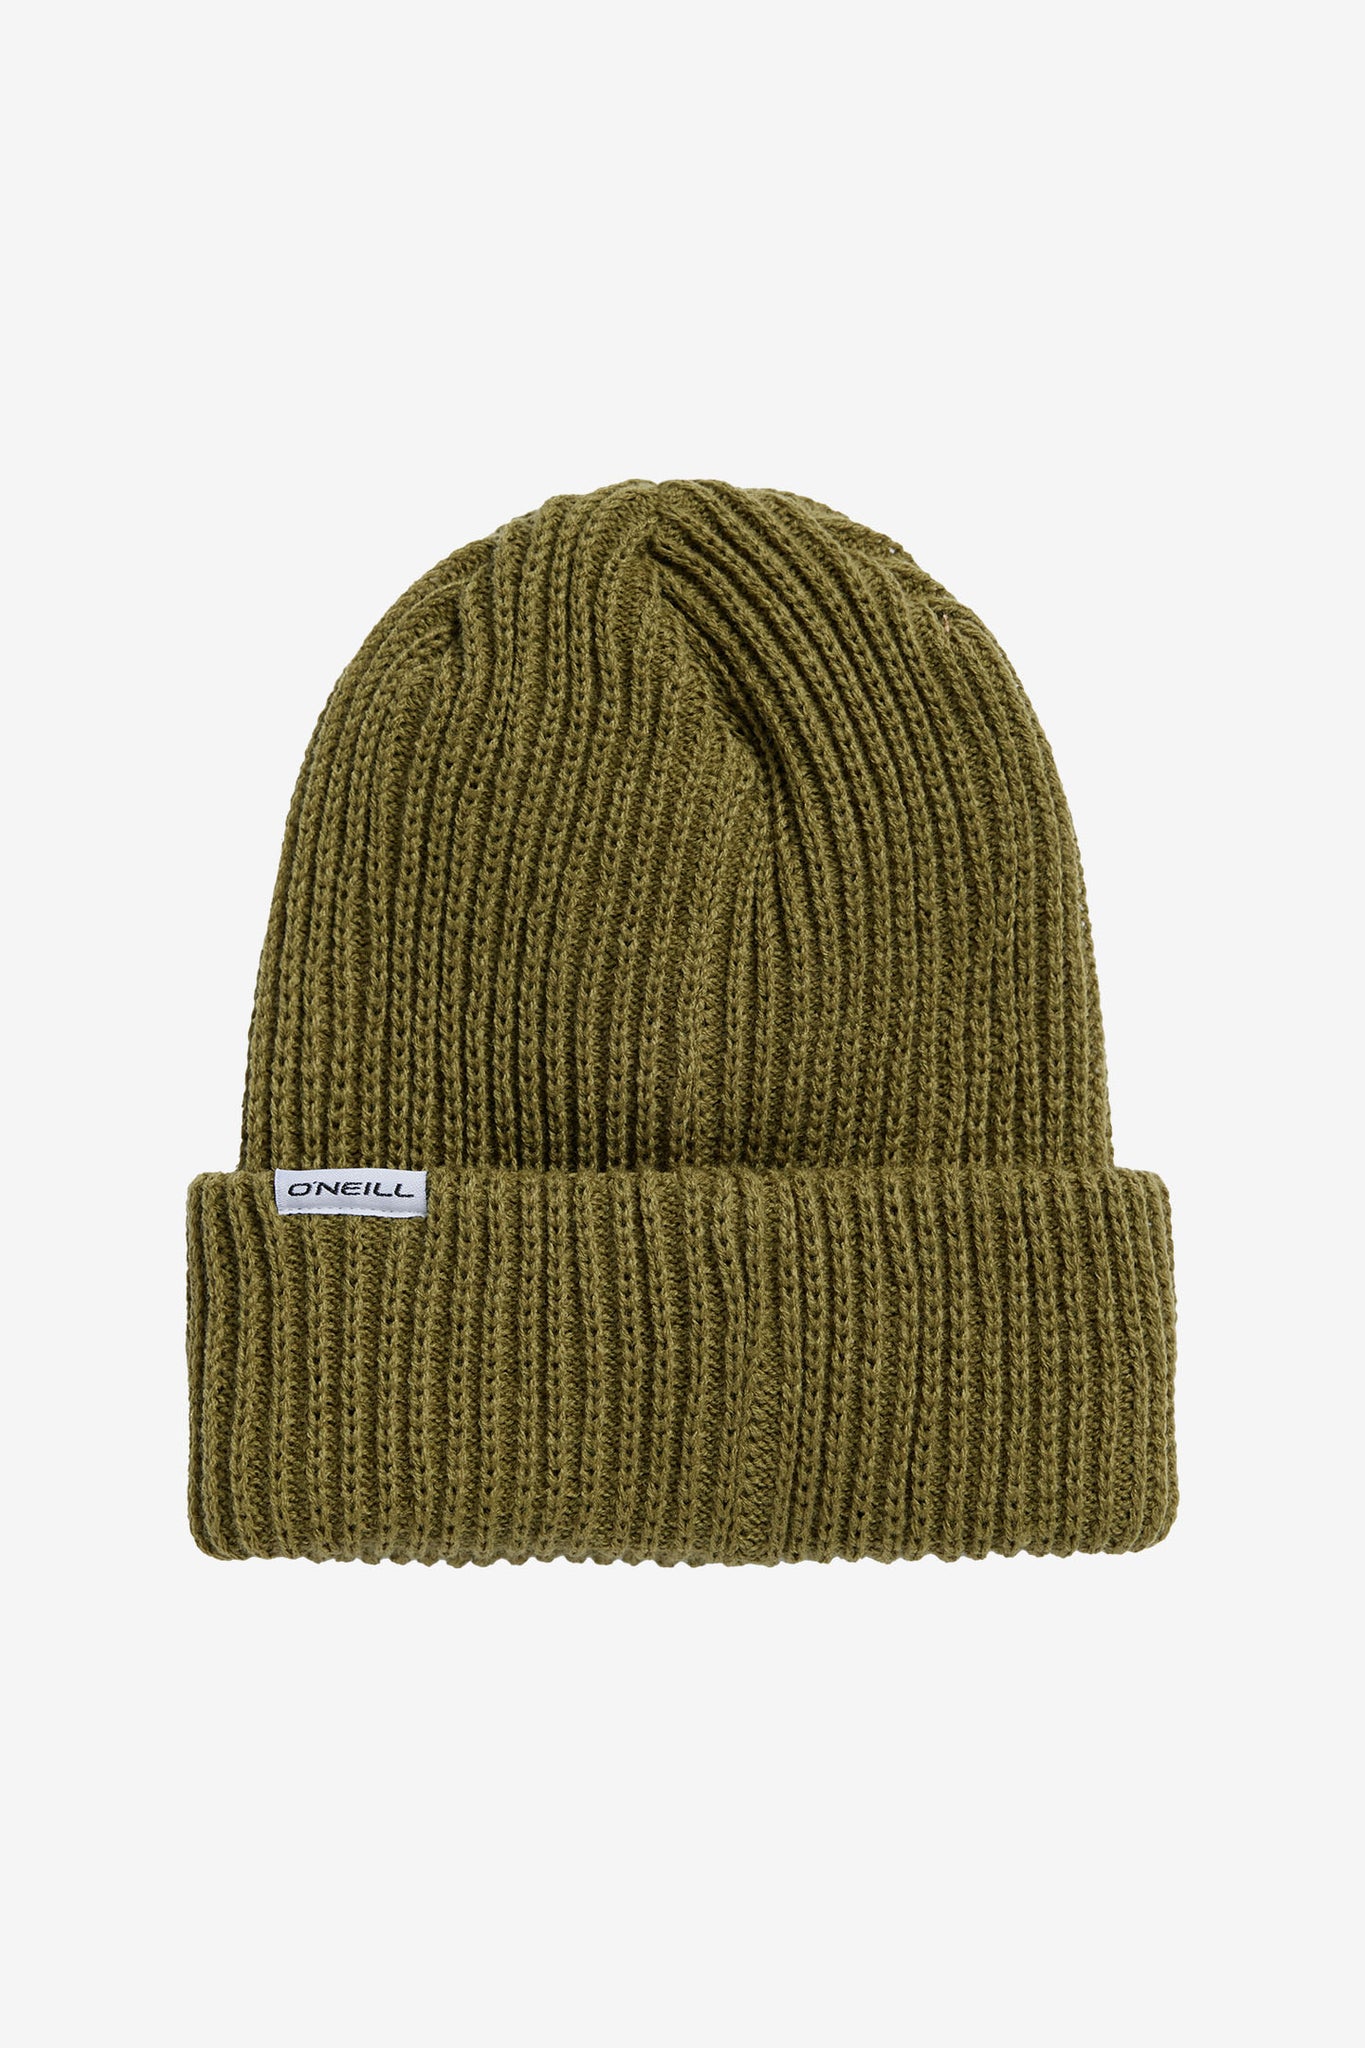 Groceries Embroidery Beanie - Olive | O'Neill